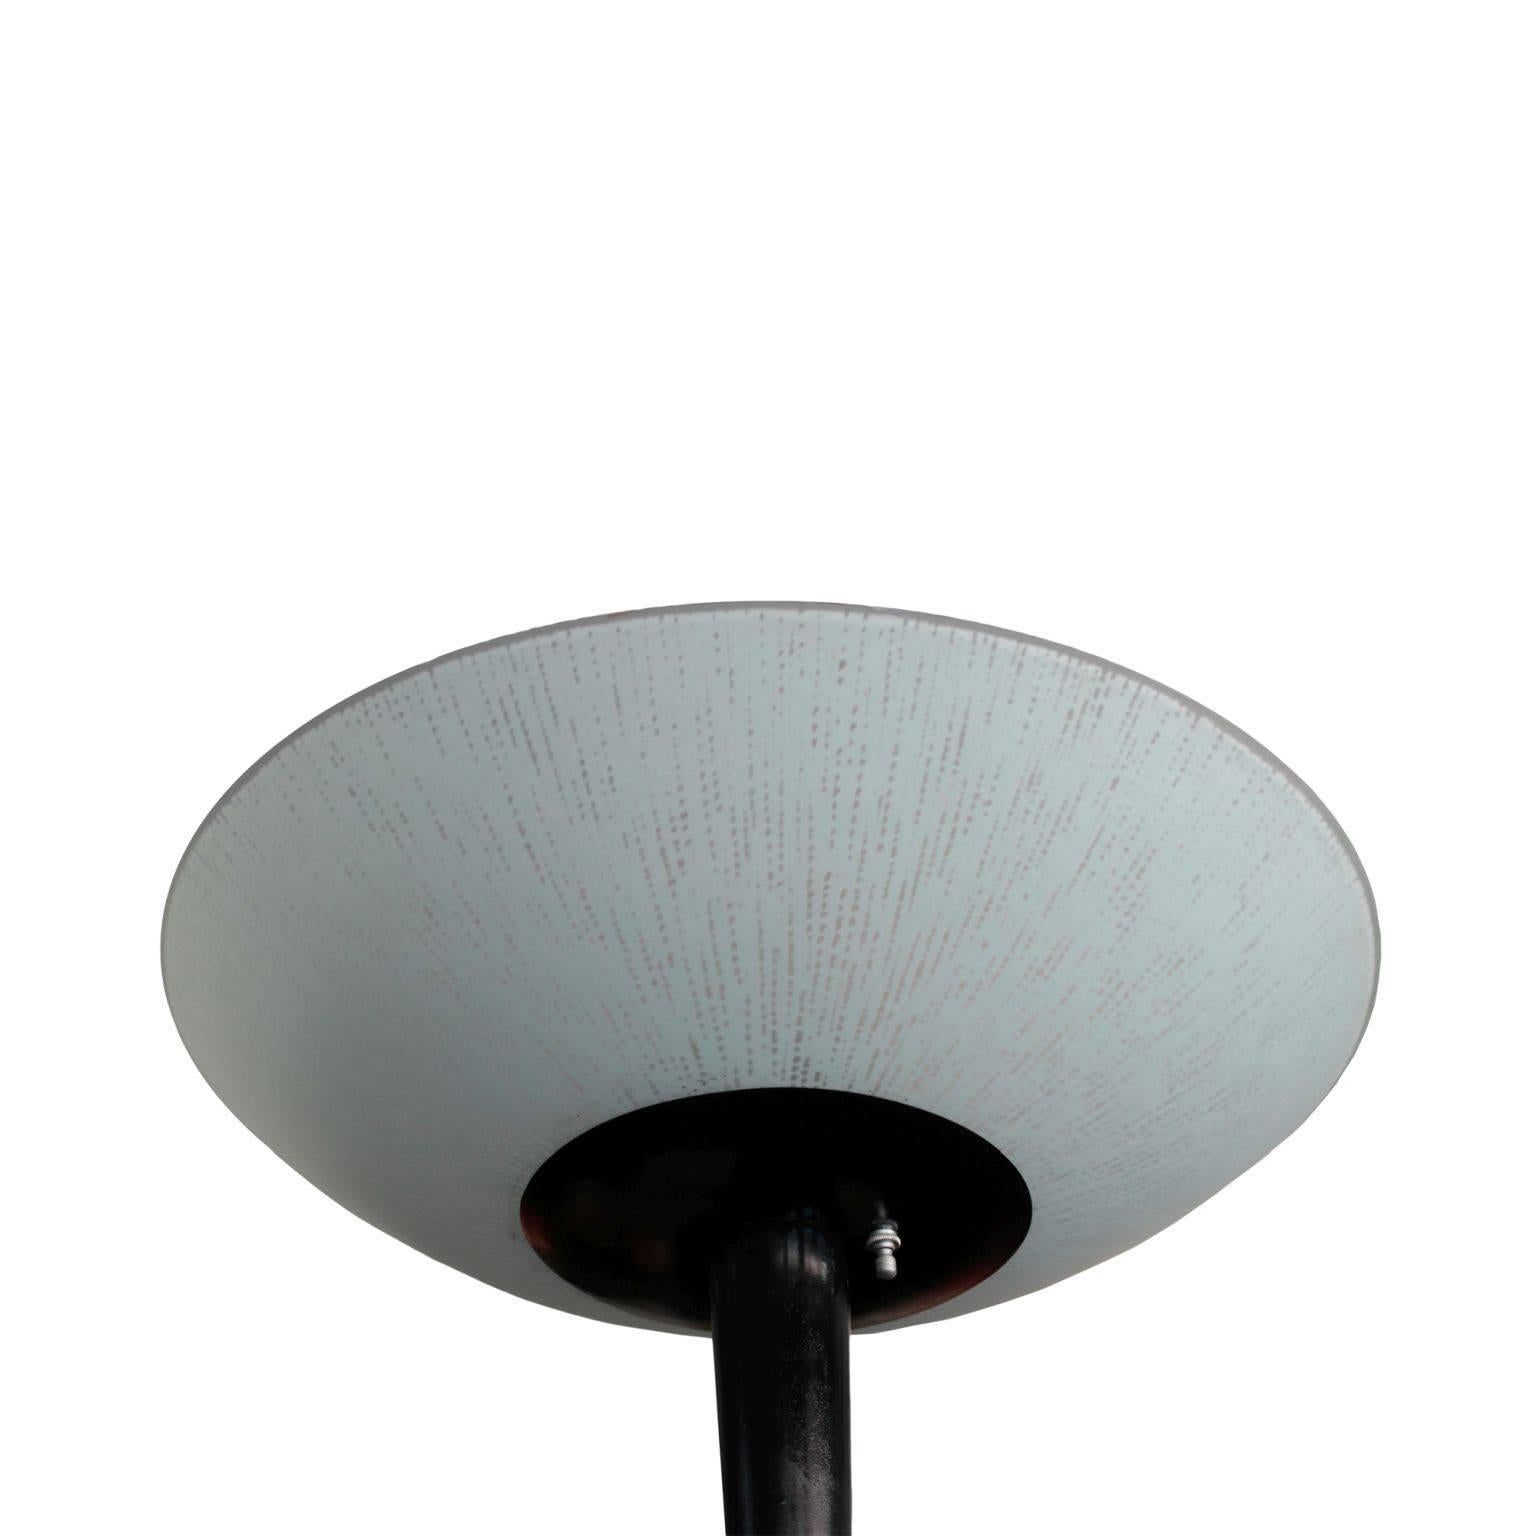 In Art Deco style, featuring frosted glass disc shaped diffuser, channeled post and disc shaped base in black metal. Fitted with three light bulbs. Some paint wear on the base. Most likely produced by Lightolier.